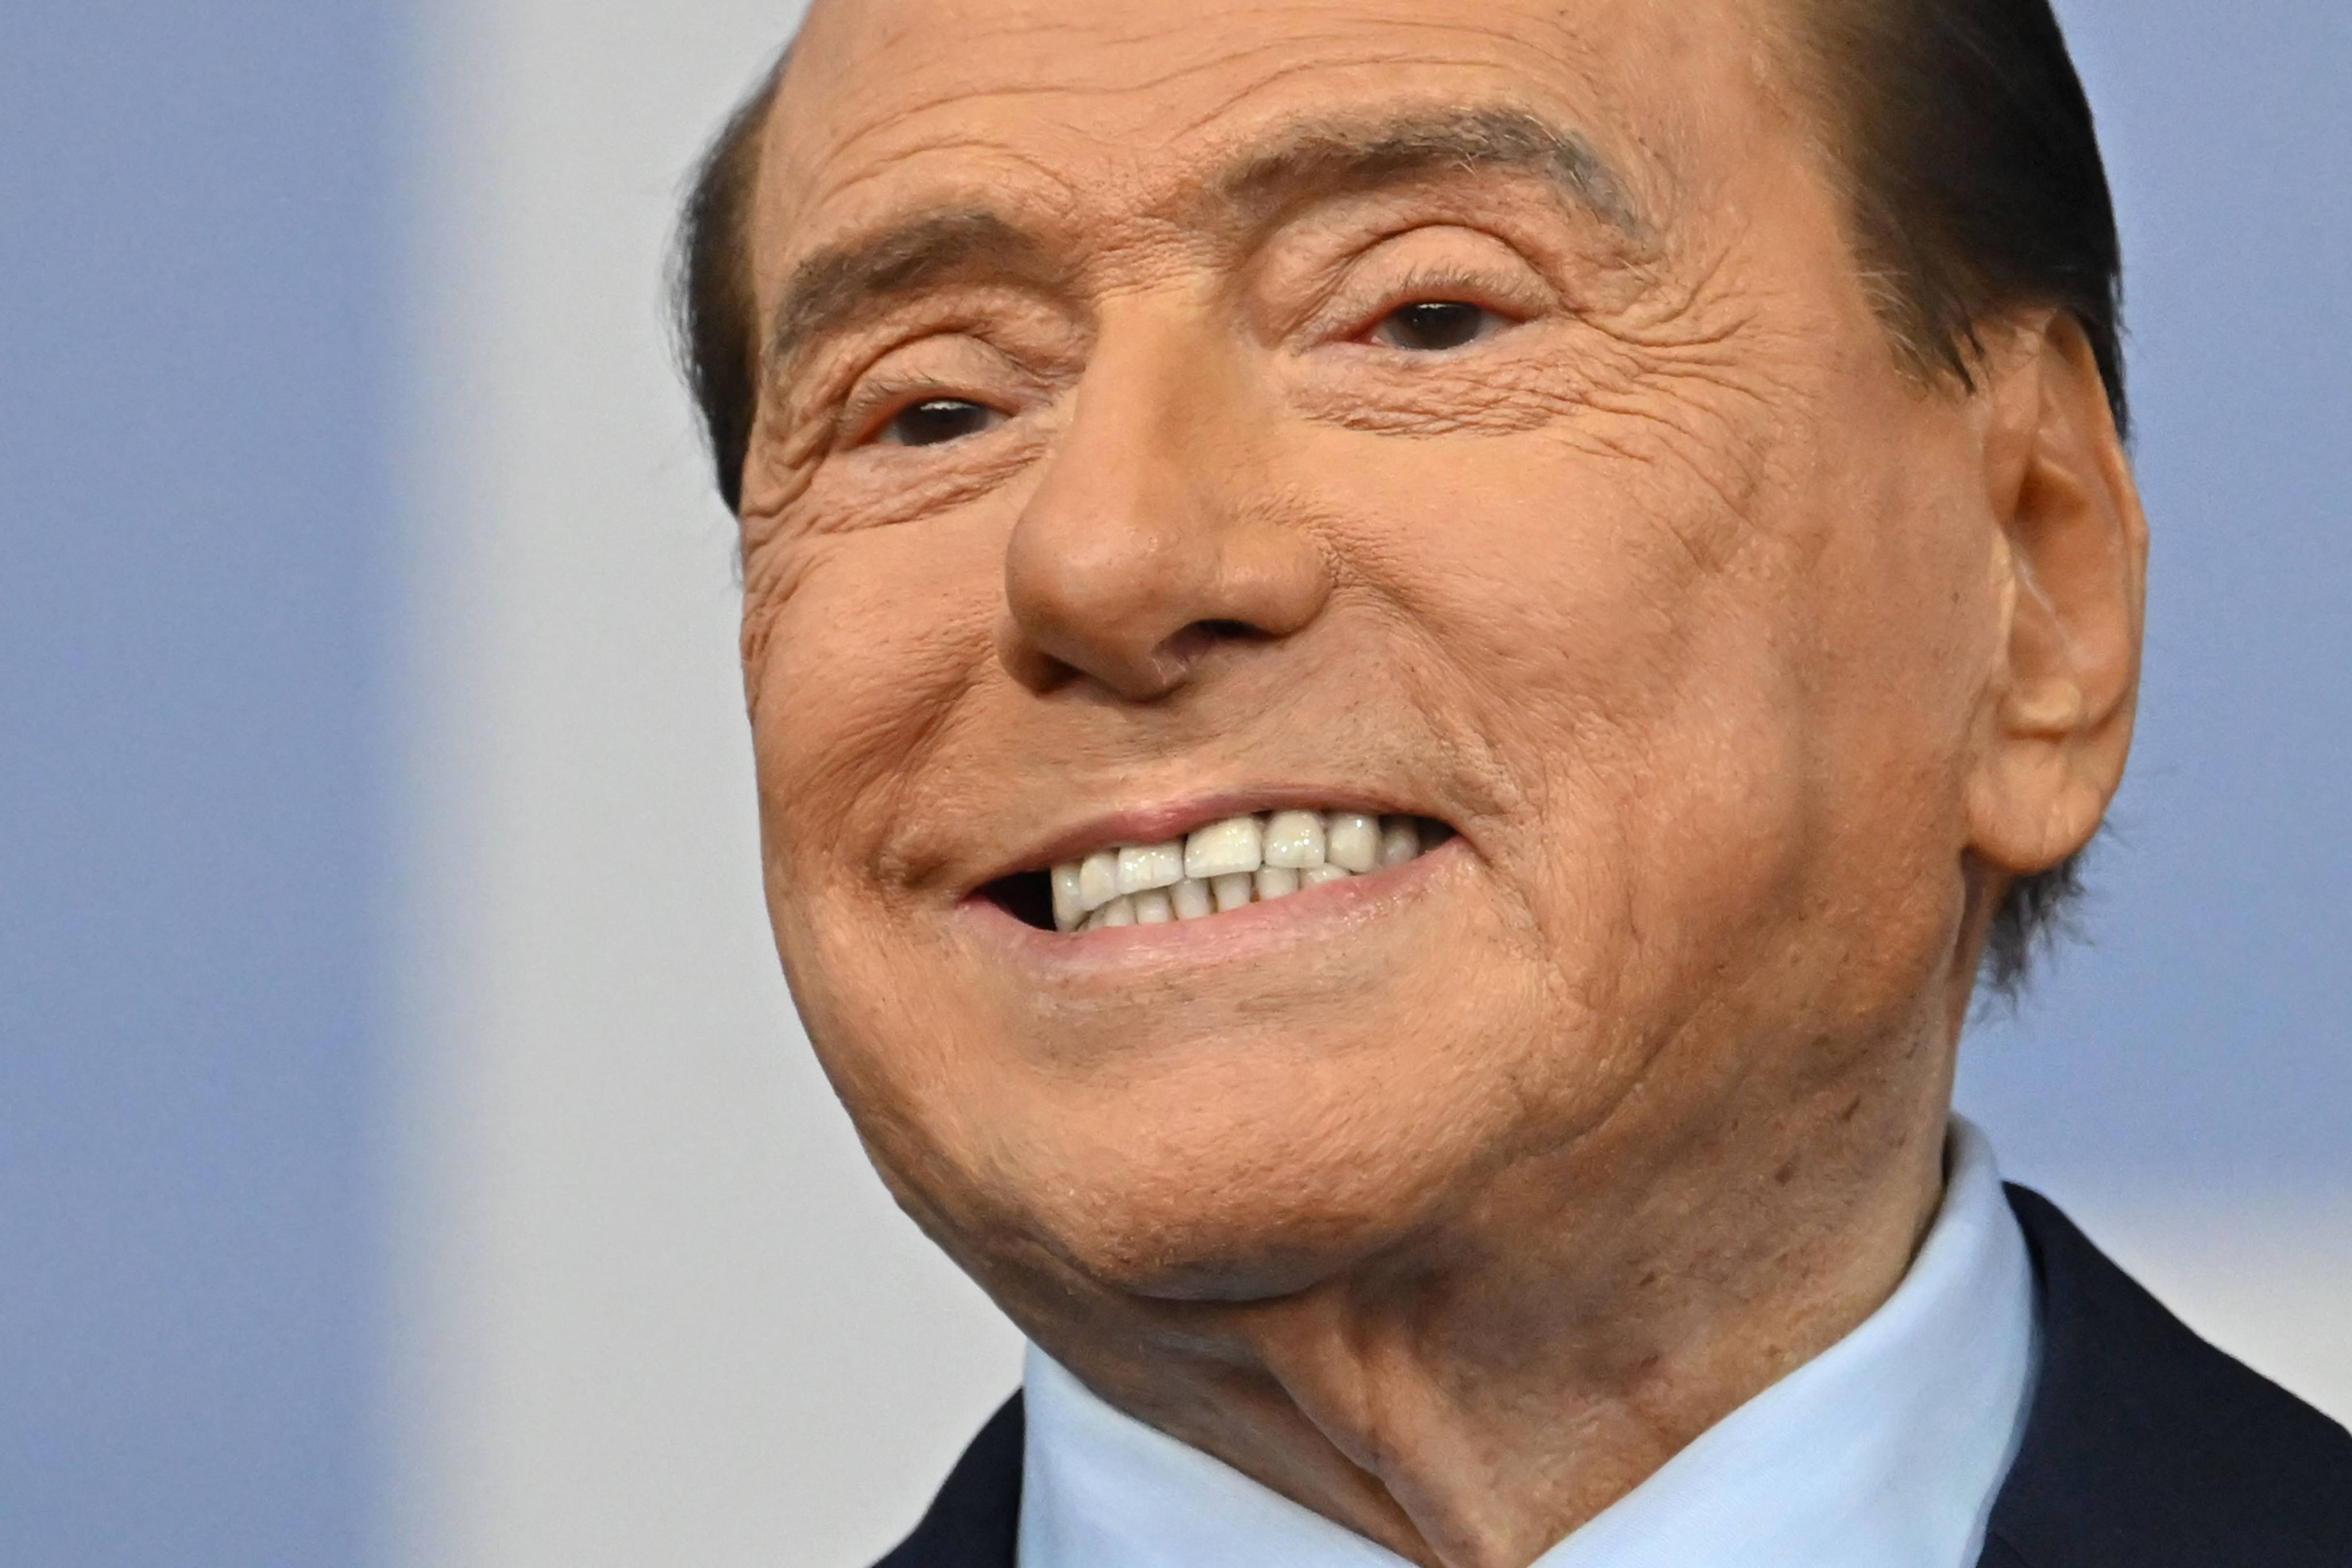 Forza Italia leader Silvio Berlusconi speaks has been acquitted of bribing witnesses. Photo: AFP